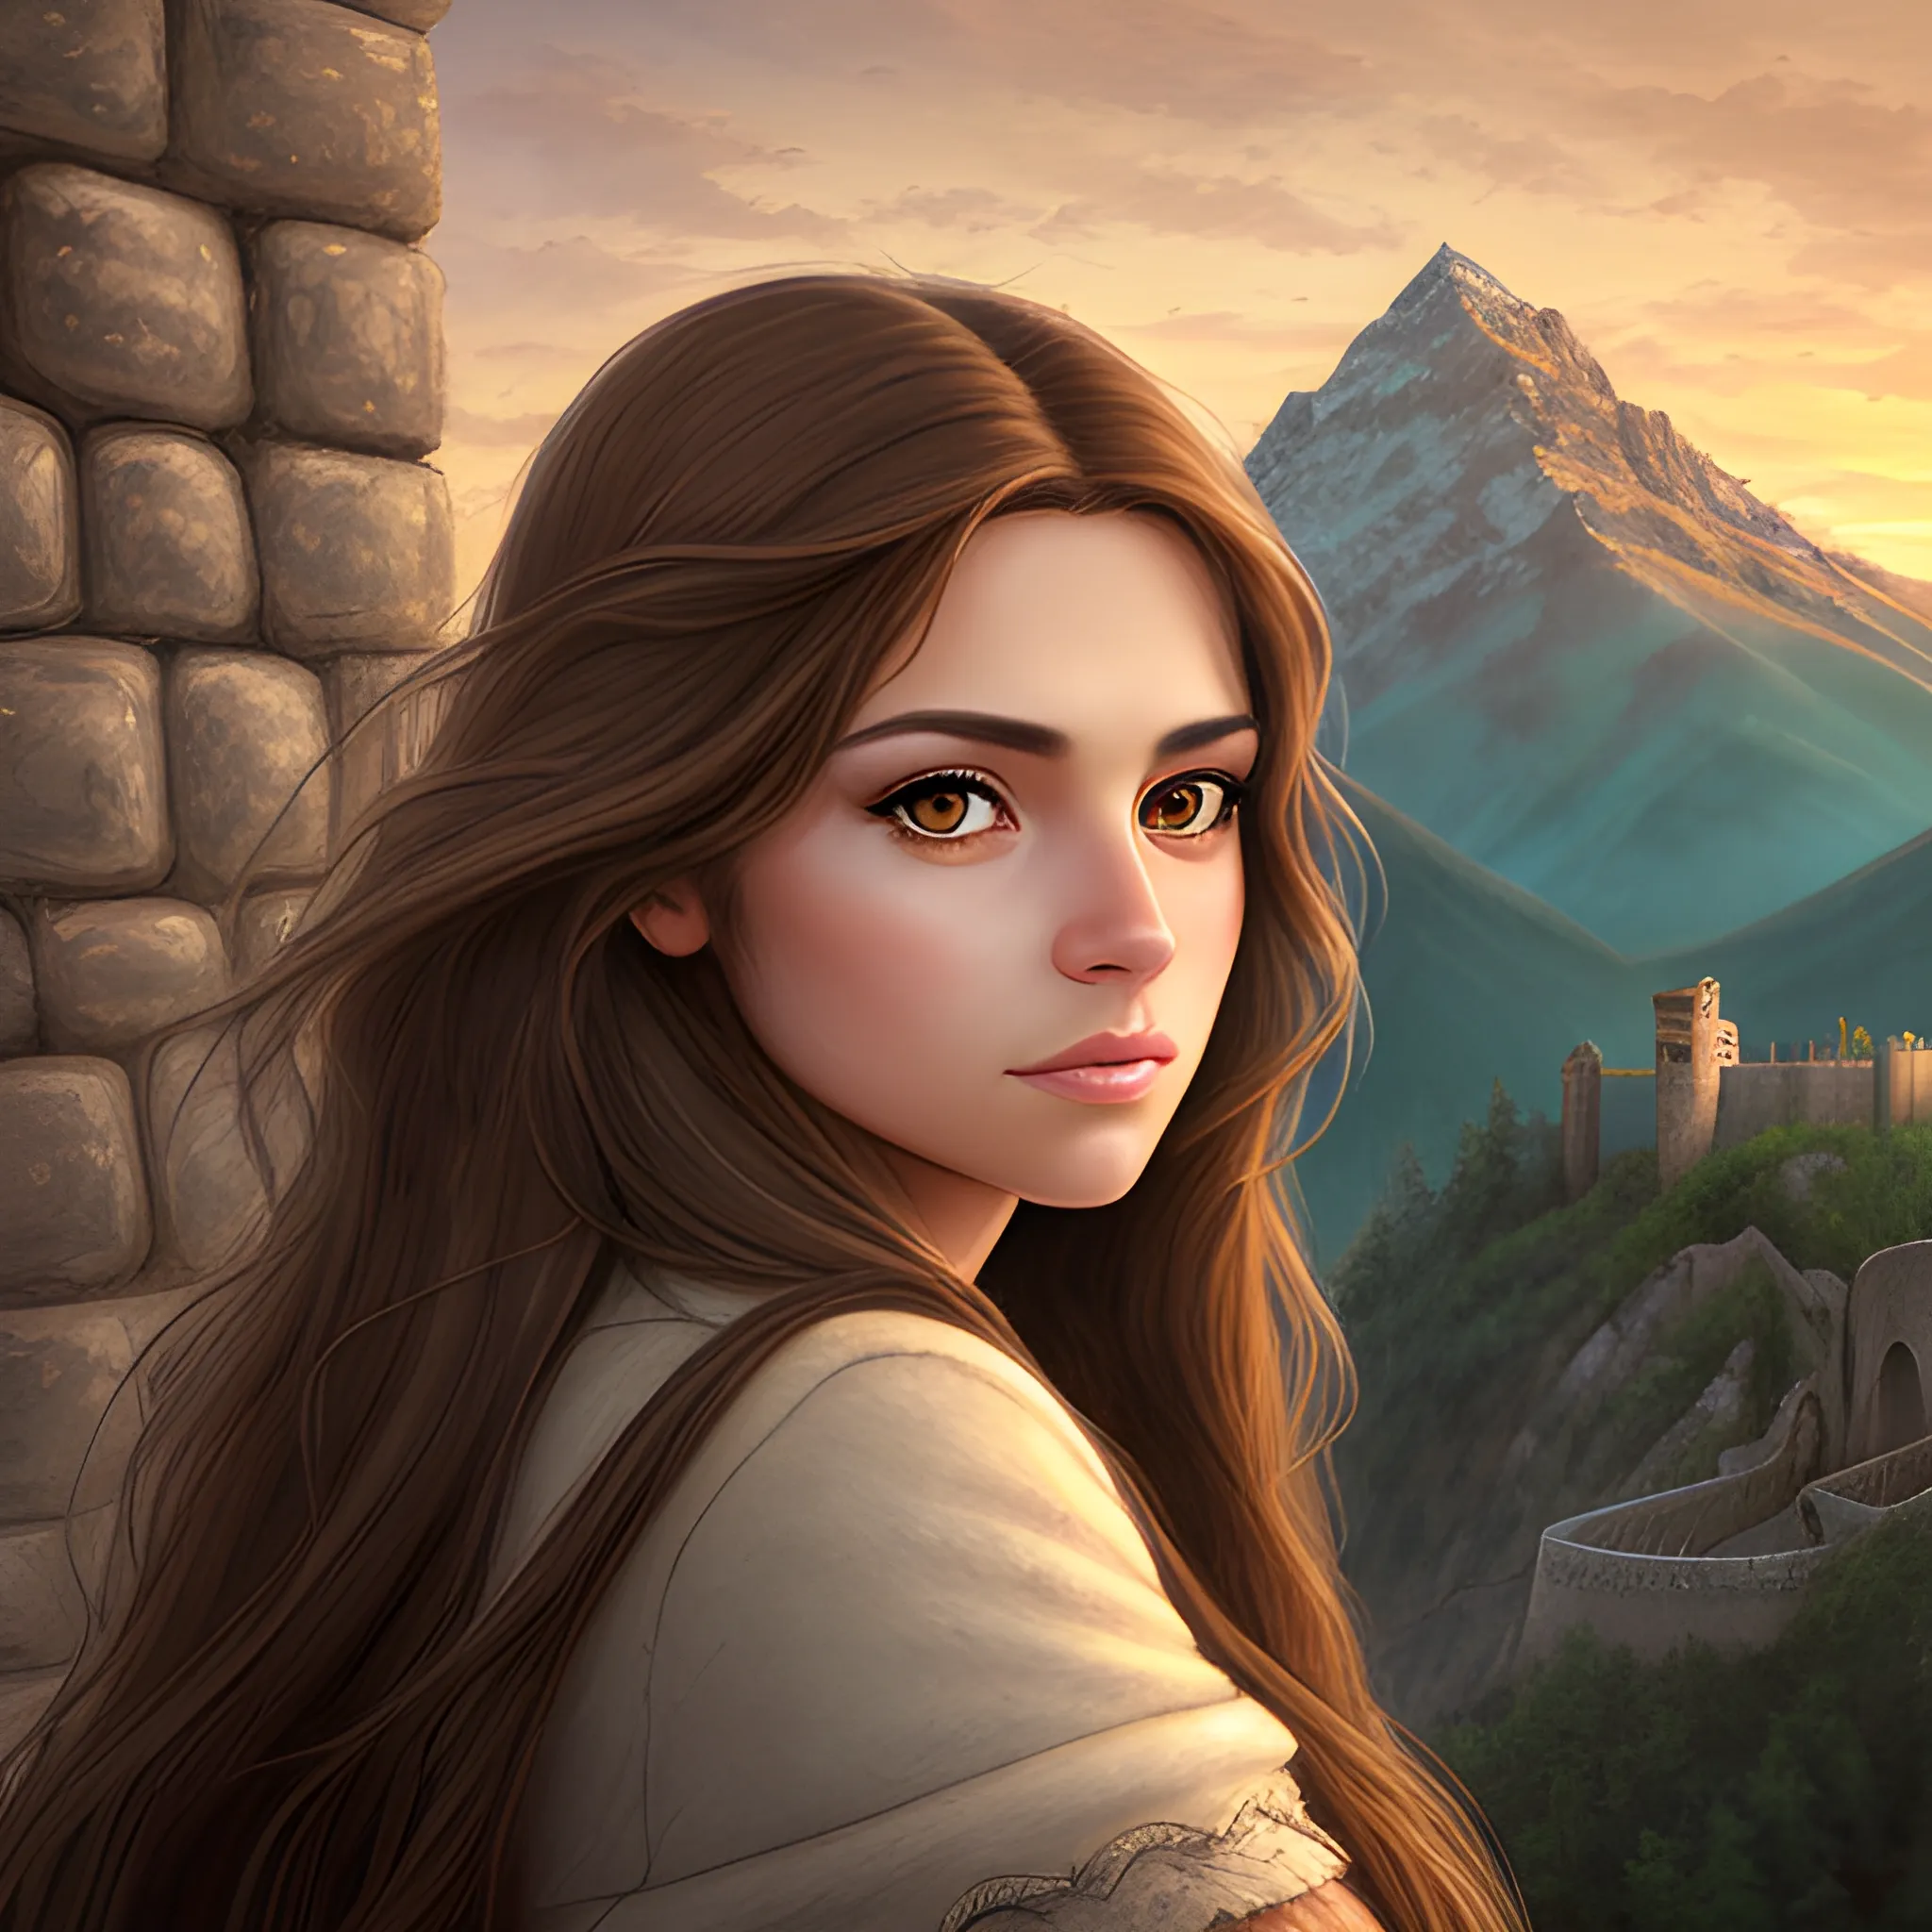 draw a beautiful woman with long brown hair and big brown eyes, one mountain and fortress, high depth of field, soft lighting, with falcon on hand